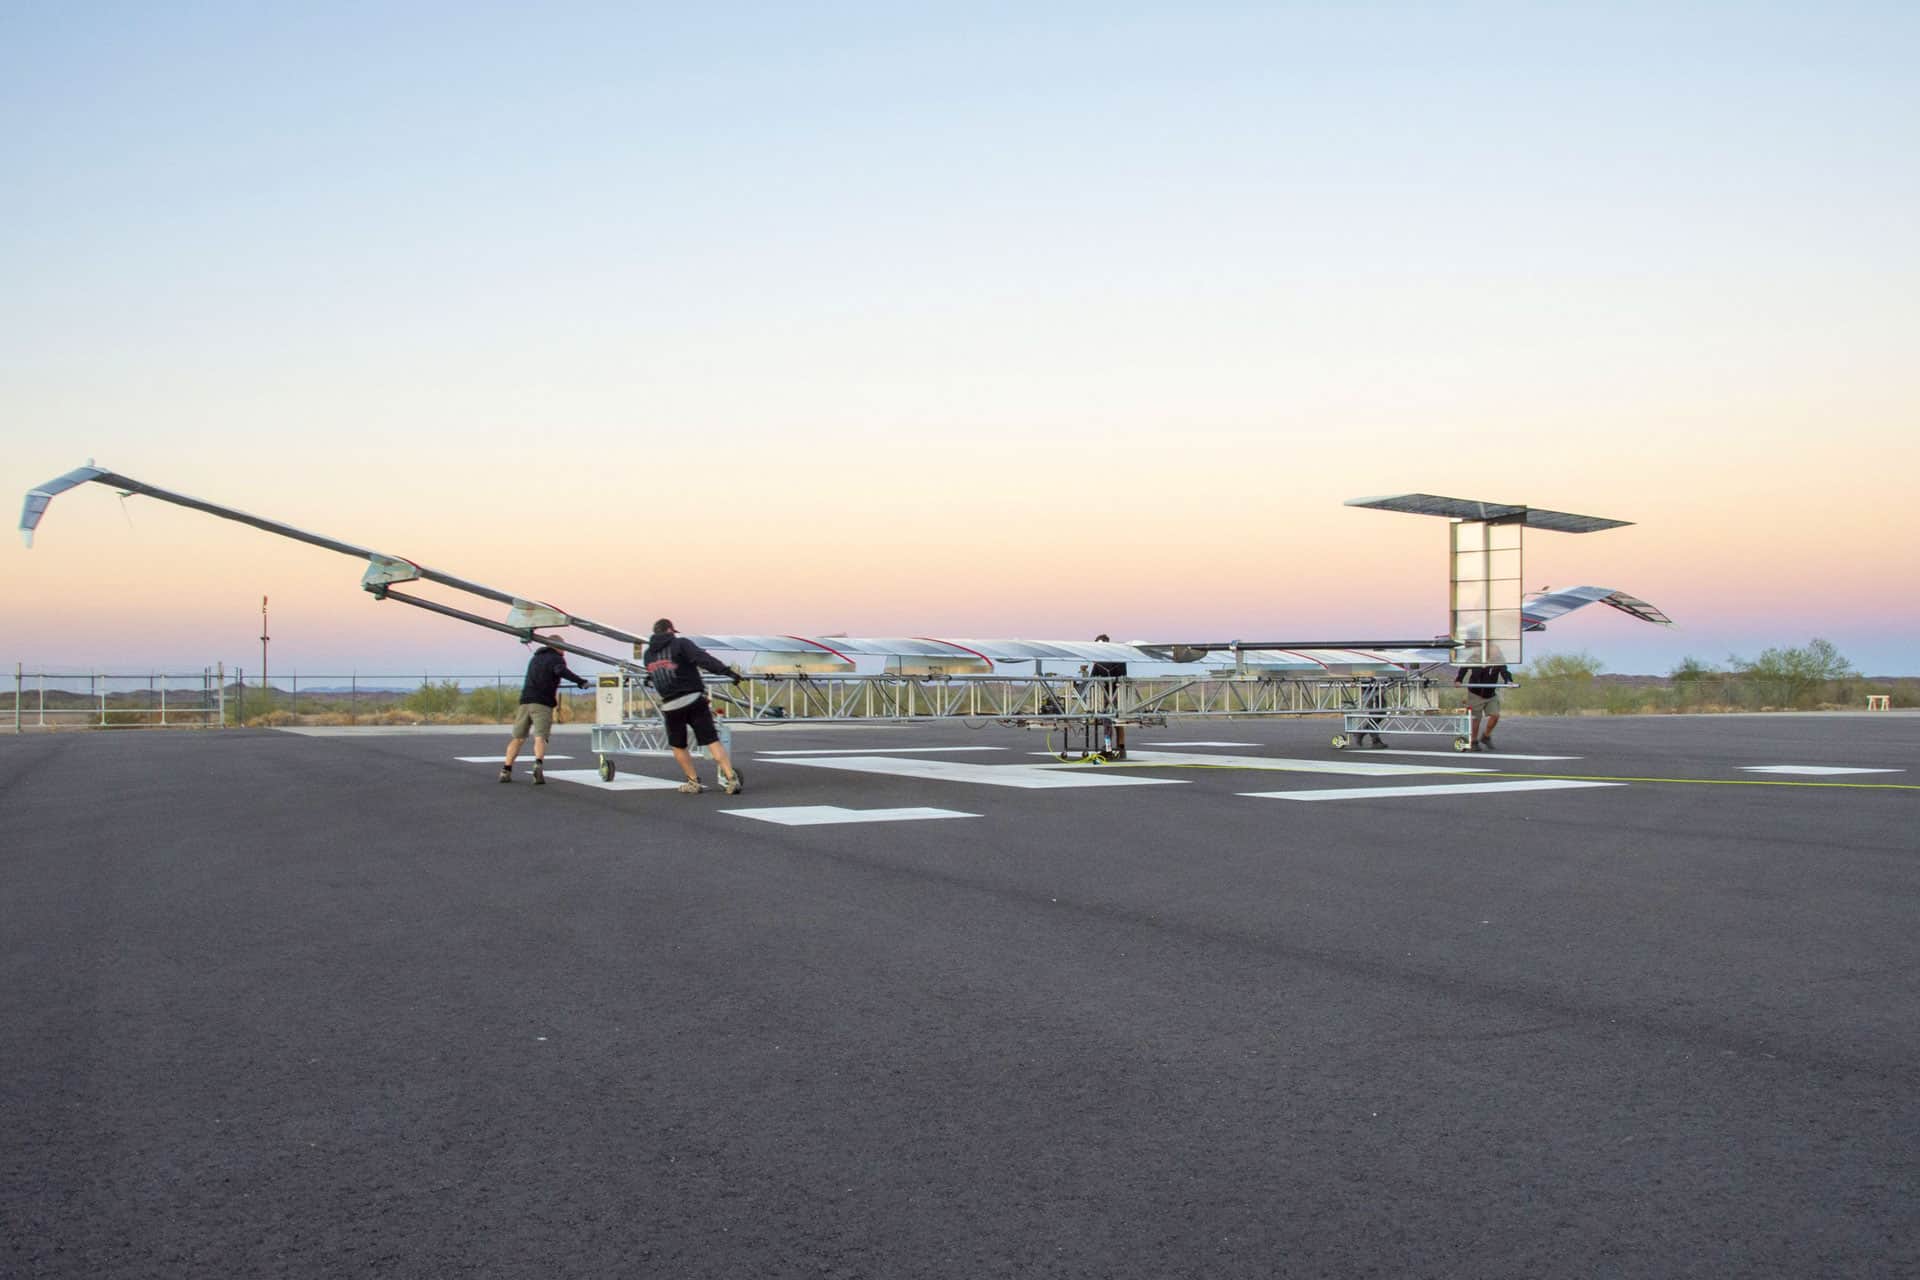 So close! Zephyr drone lands just hours before setting flight